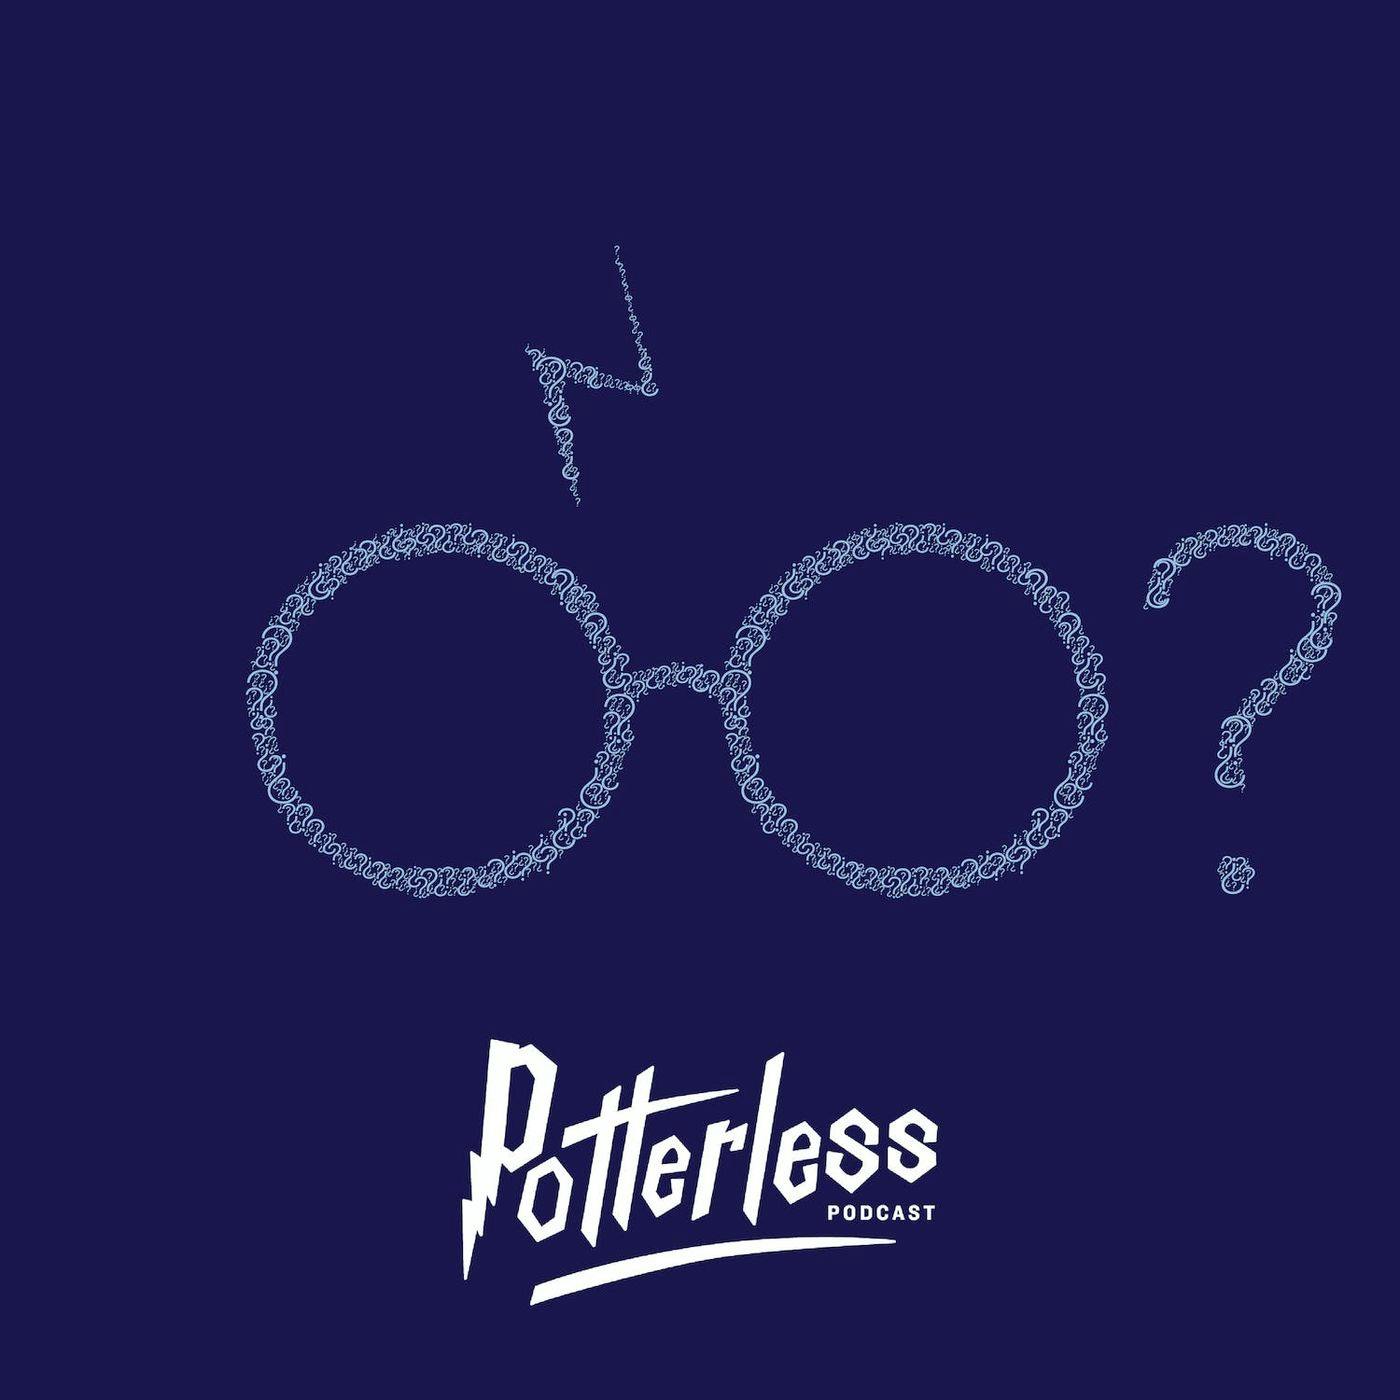 Ep. 191 - Potterless: A Look Back w/ Kelly Schubert, Dottie James, and Johnny Frohlichstein